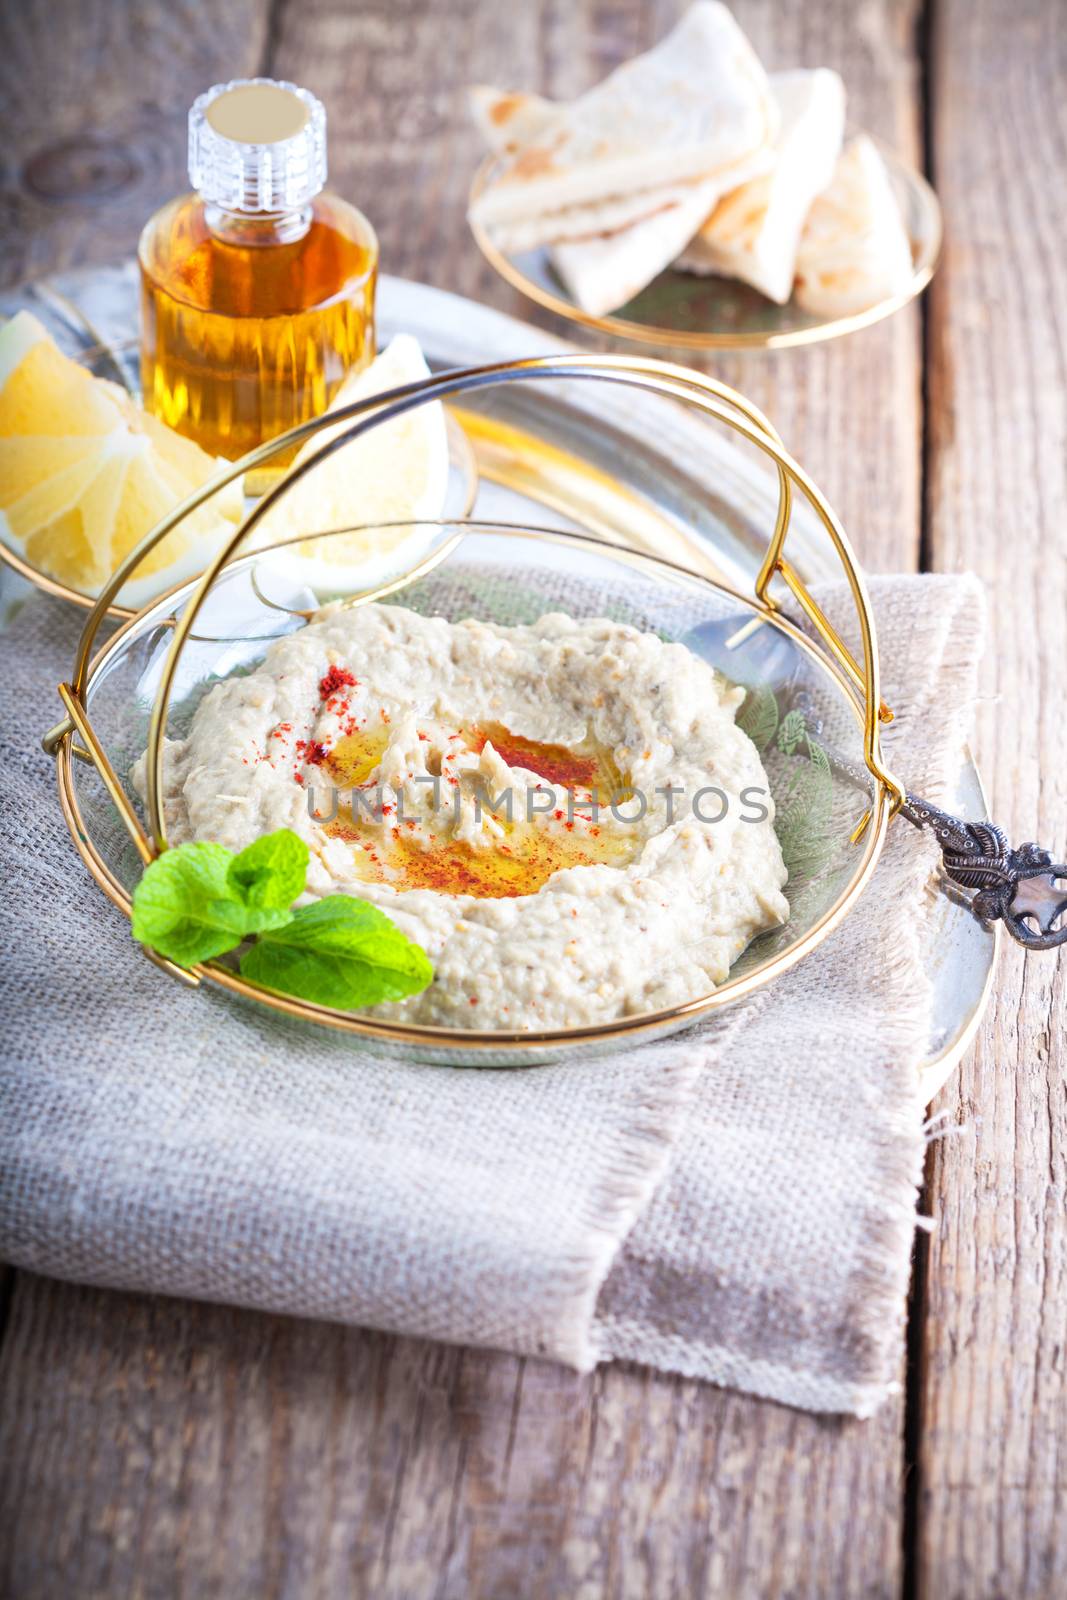 Baba ghanoush, eggplant dip, mediterranean food on a wooden surface